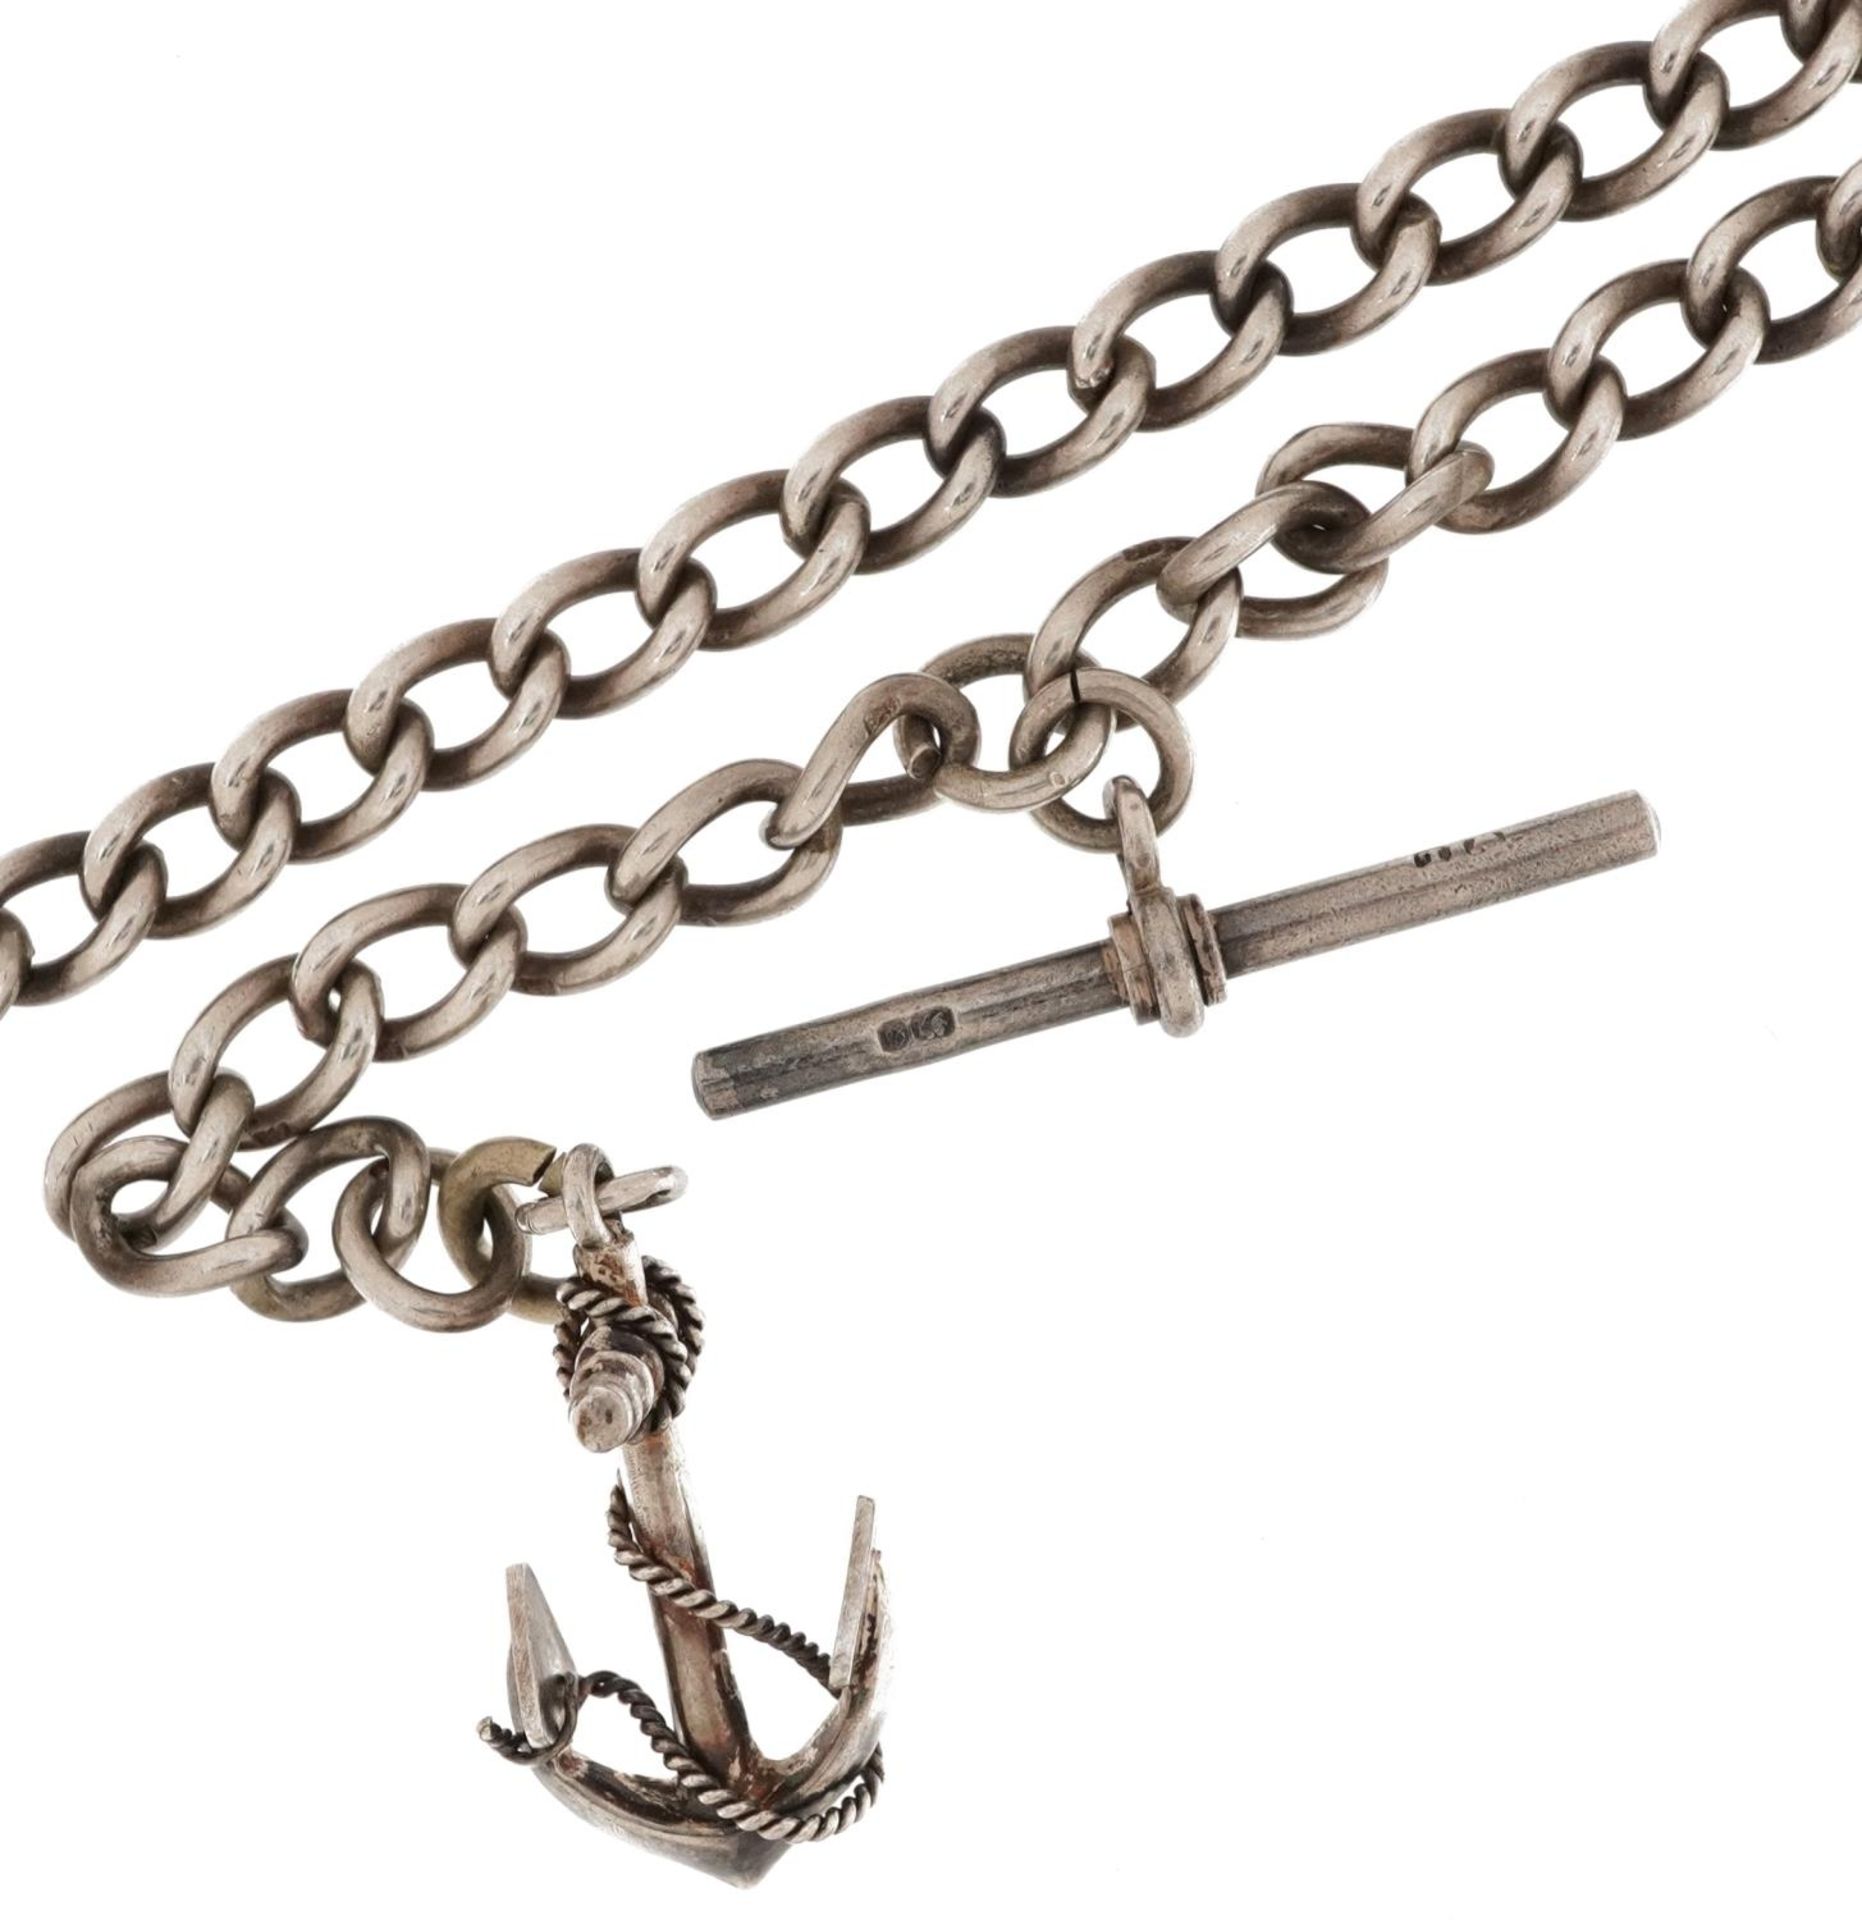 Gentlemen's silver watch chain with T bar, dog clip clasp and anchor pendant, 35cm in length, 35.0g